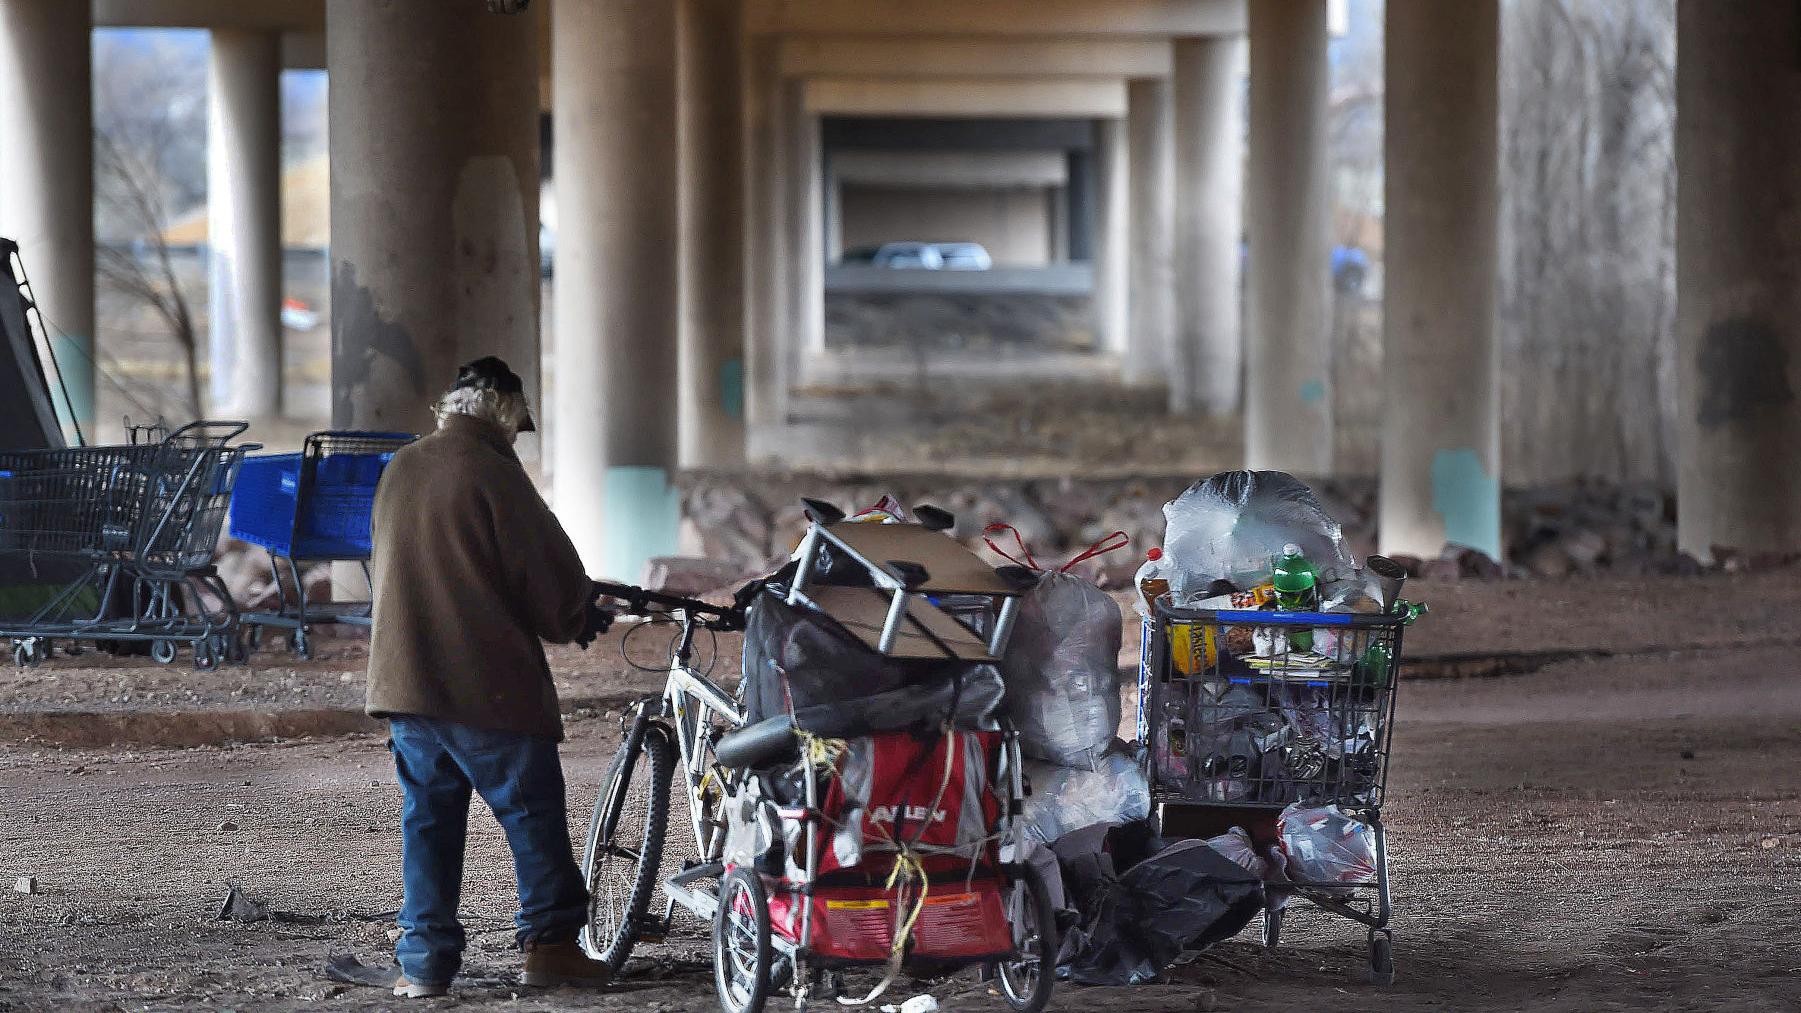 Residents Of Fountain Creek Homeless Camp Prepare To Move Along